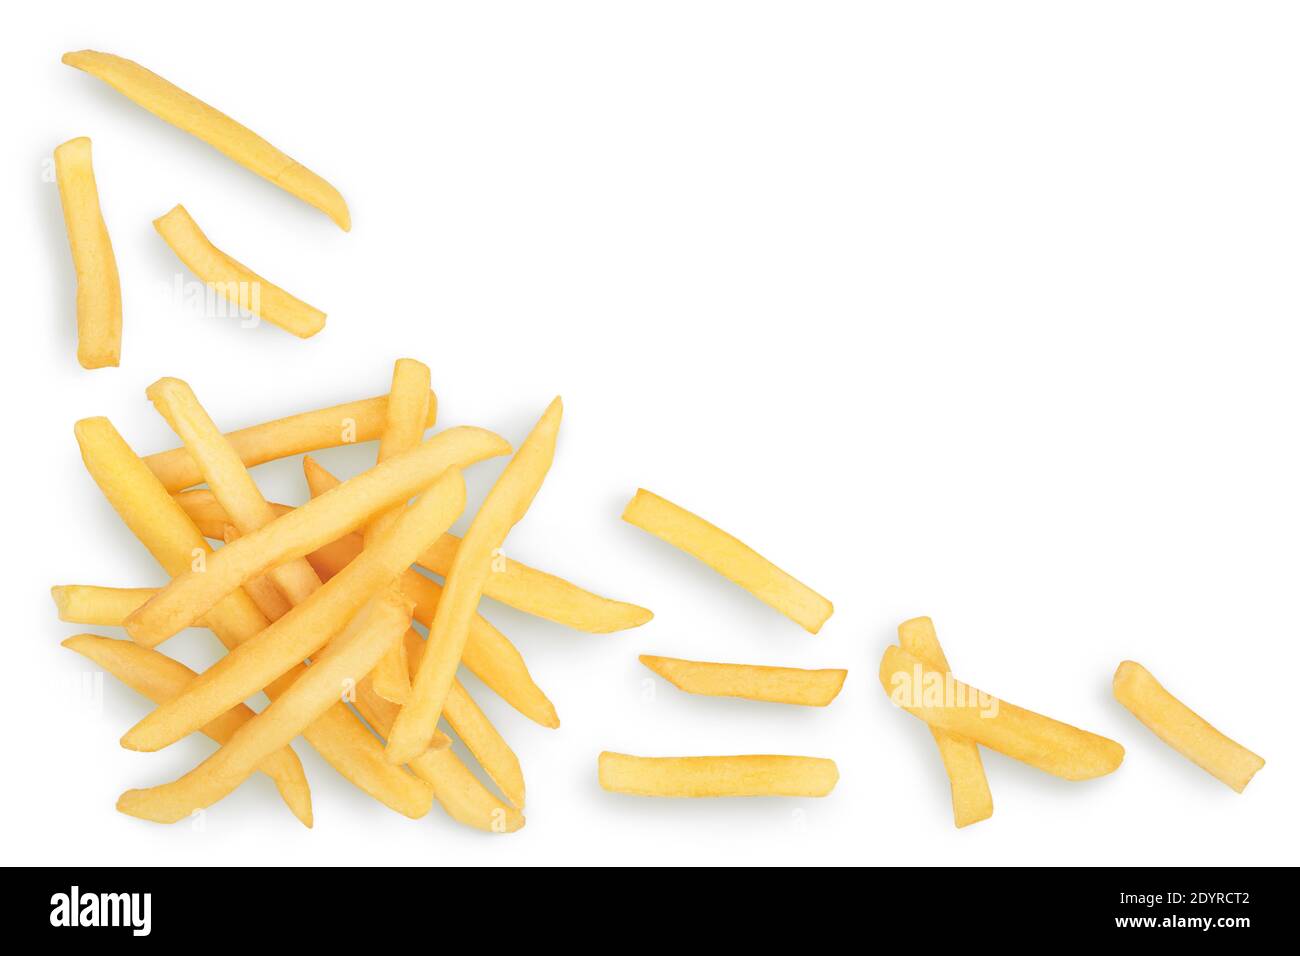 French fries or fried potatoes isolated on white background with clipping path . Top view with copy space for your text. Flat lay Stock Photo